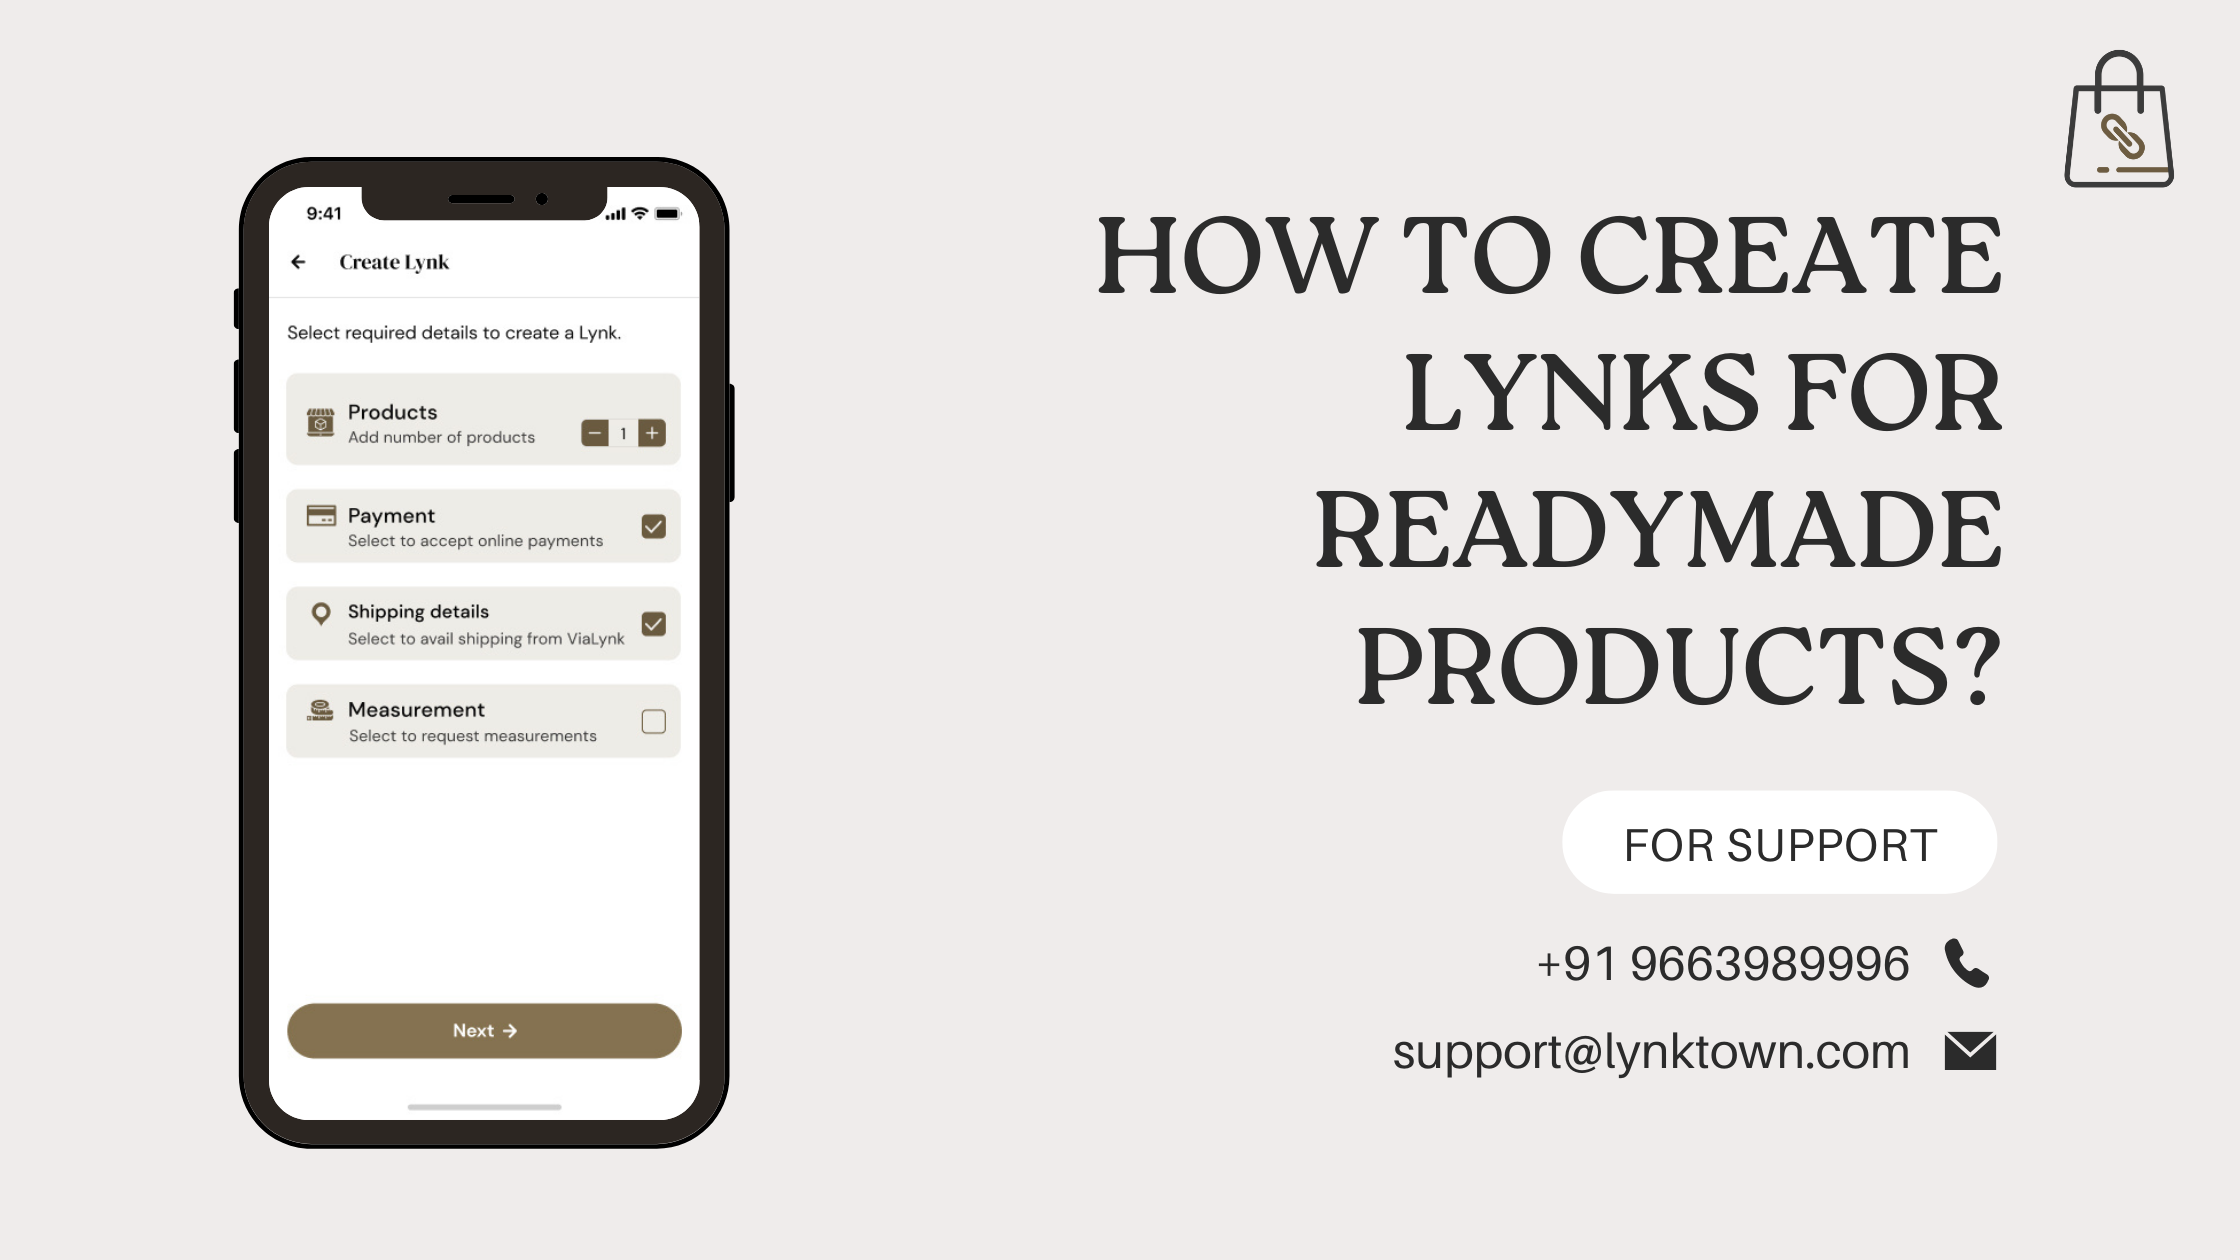 How to create a Lynk for readymade products?